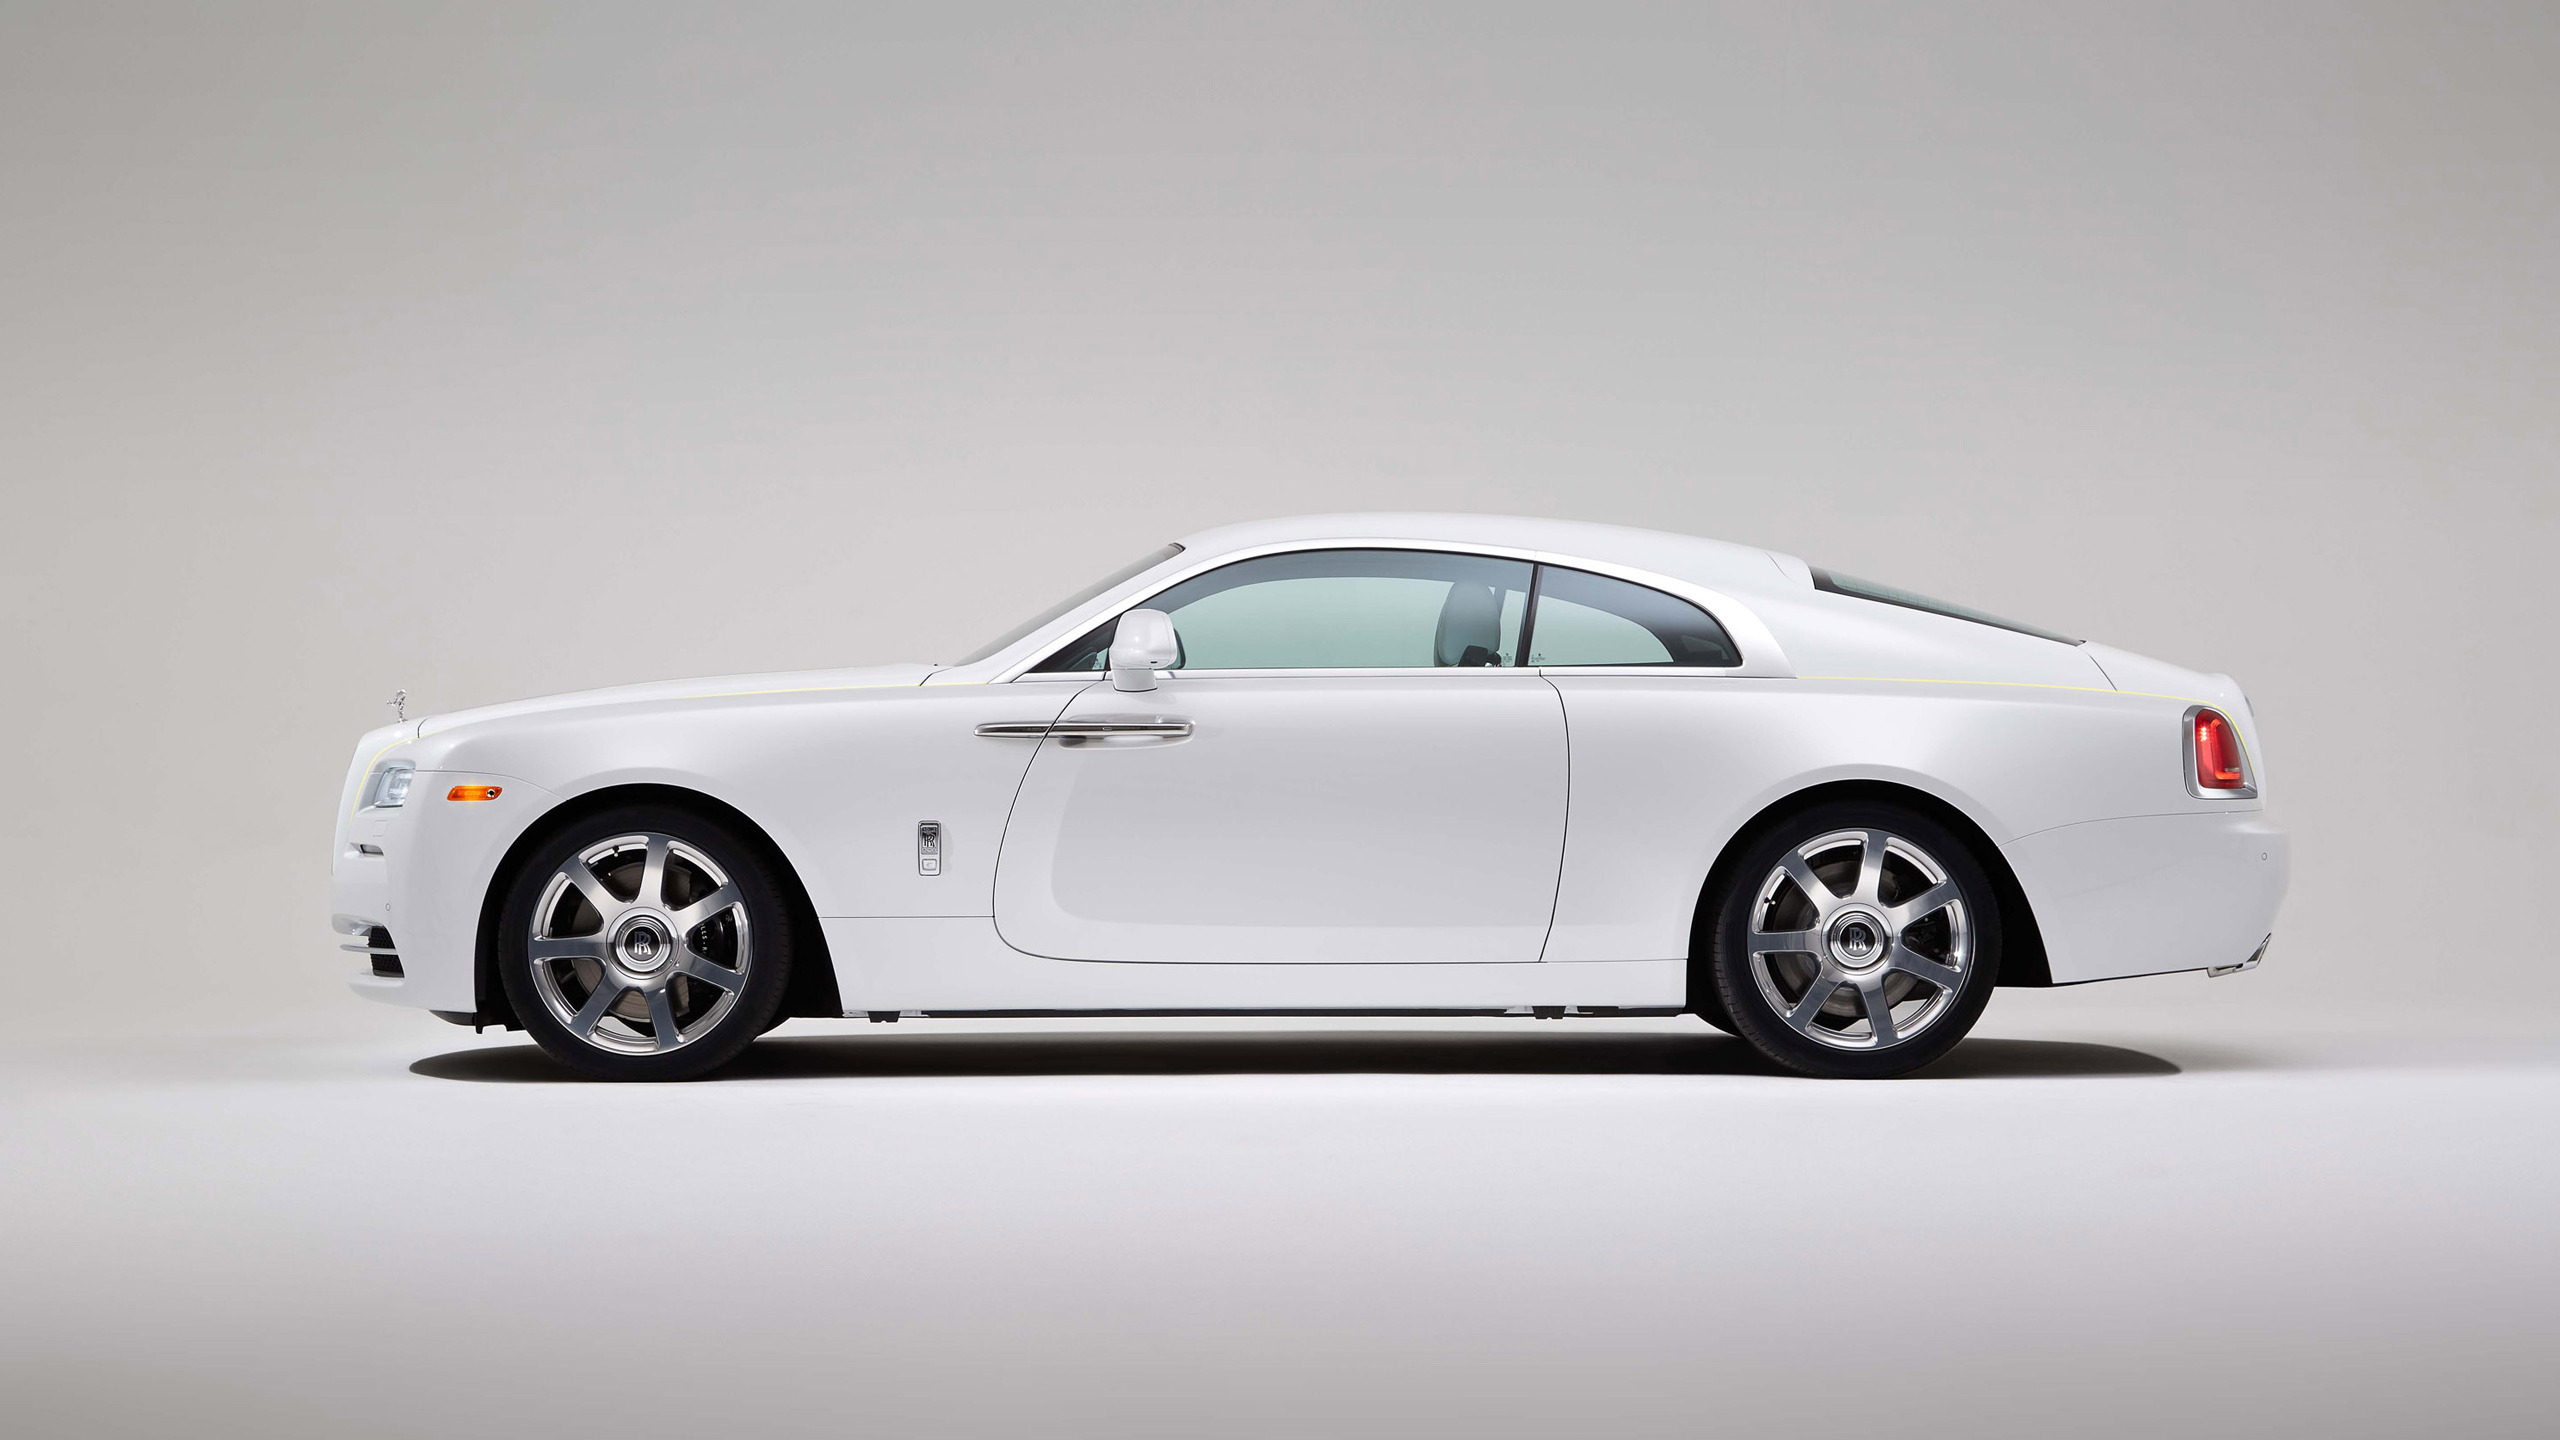 Car Rolls Royce Luxury Cars British Cars White Cars Side View Minimalism Vehicle Simple Background 2560x1440